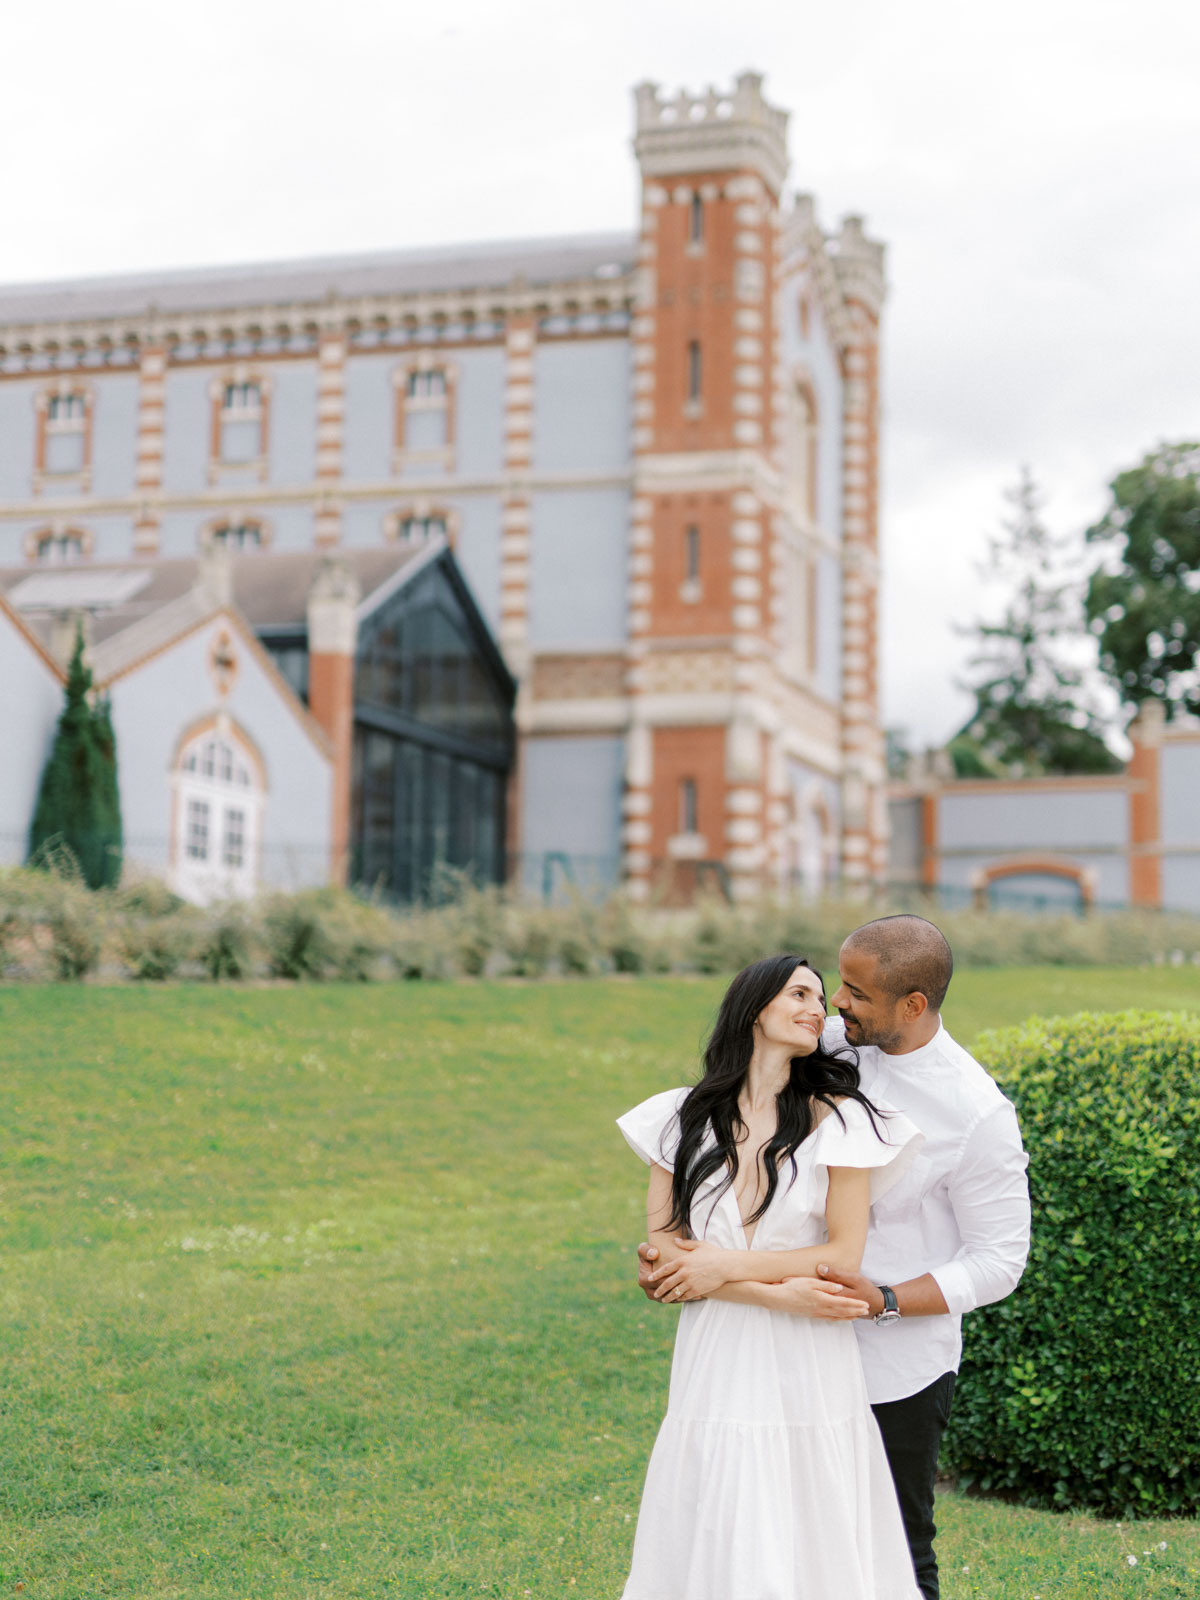 Engagement Photos Champagne France Wineries | Chernogorov Photography